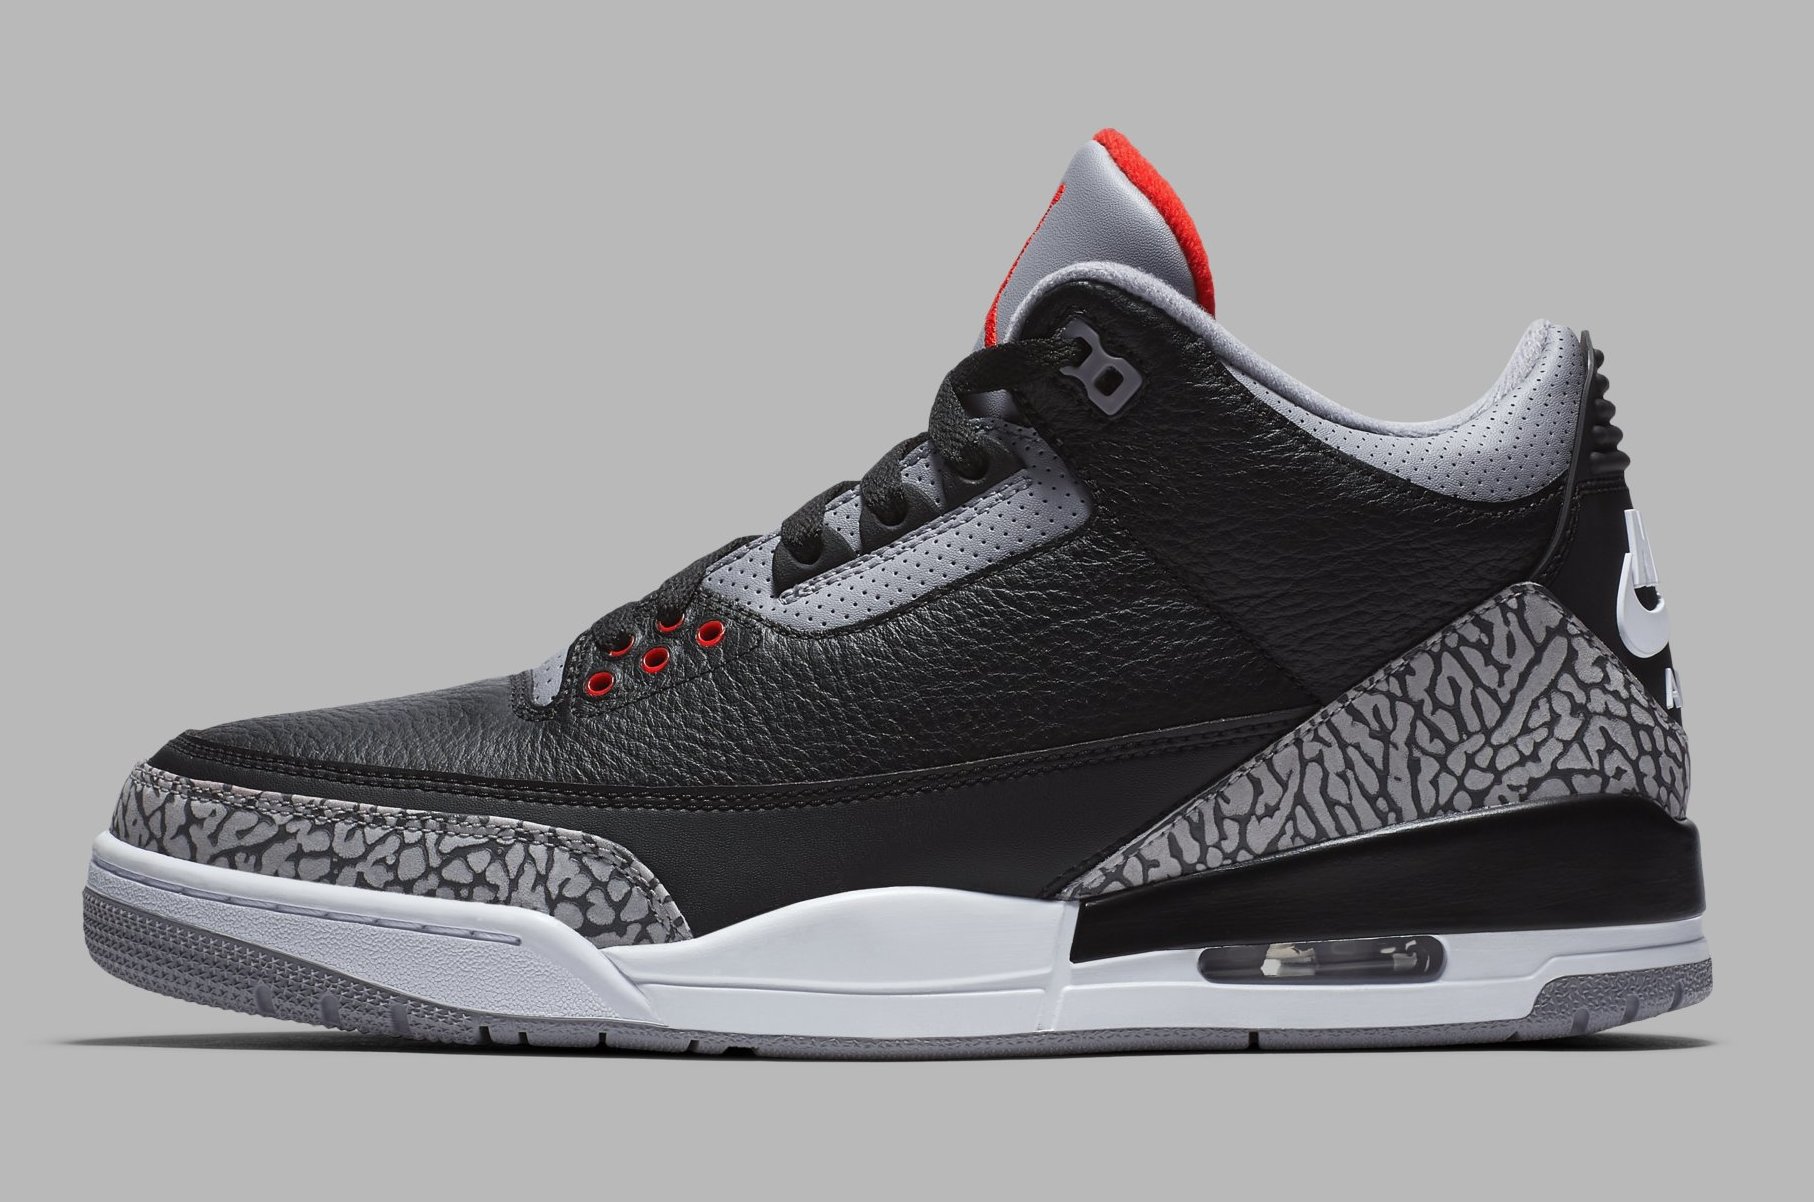 Air Jordan 3 Black/Cement Grey White Fire Red 854262 001 (Lateral)